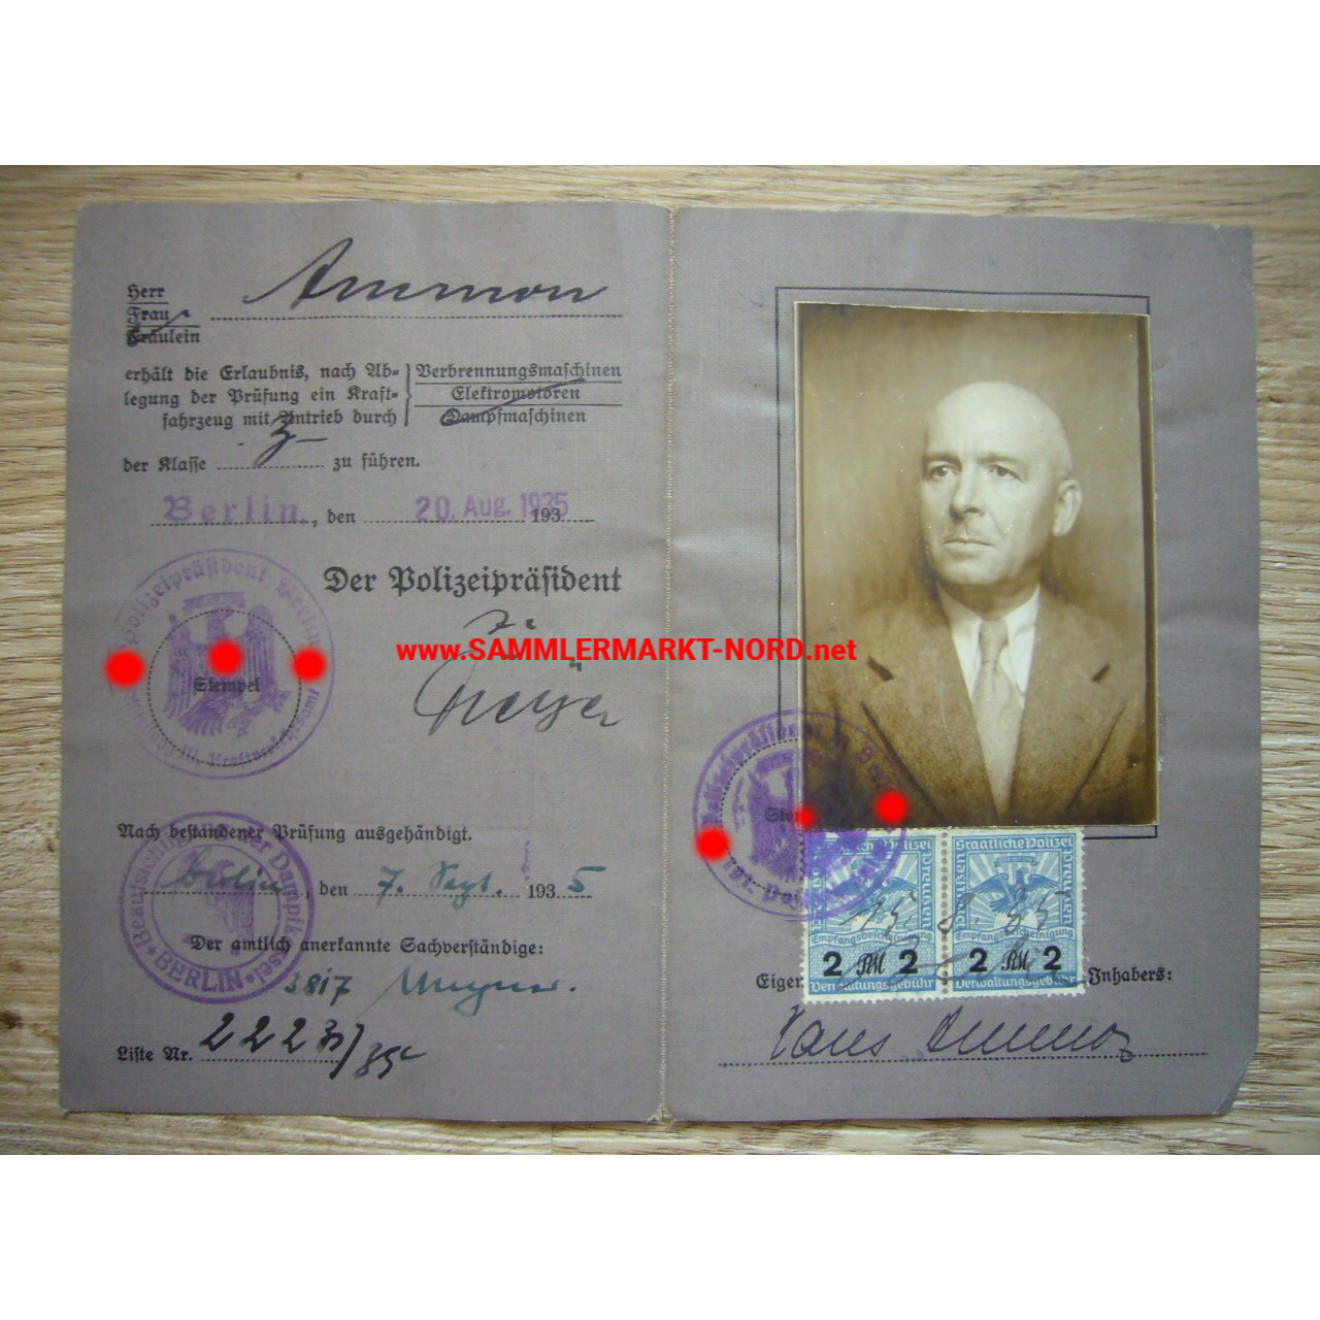 Class 3 driving licence - Hans Ammon